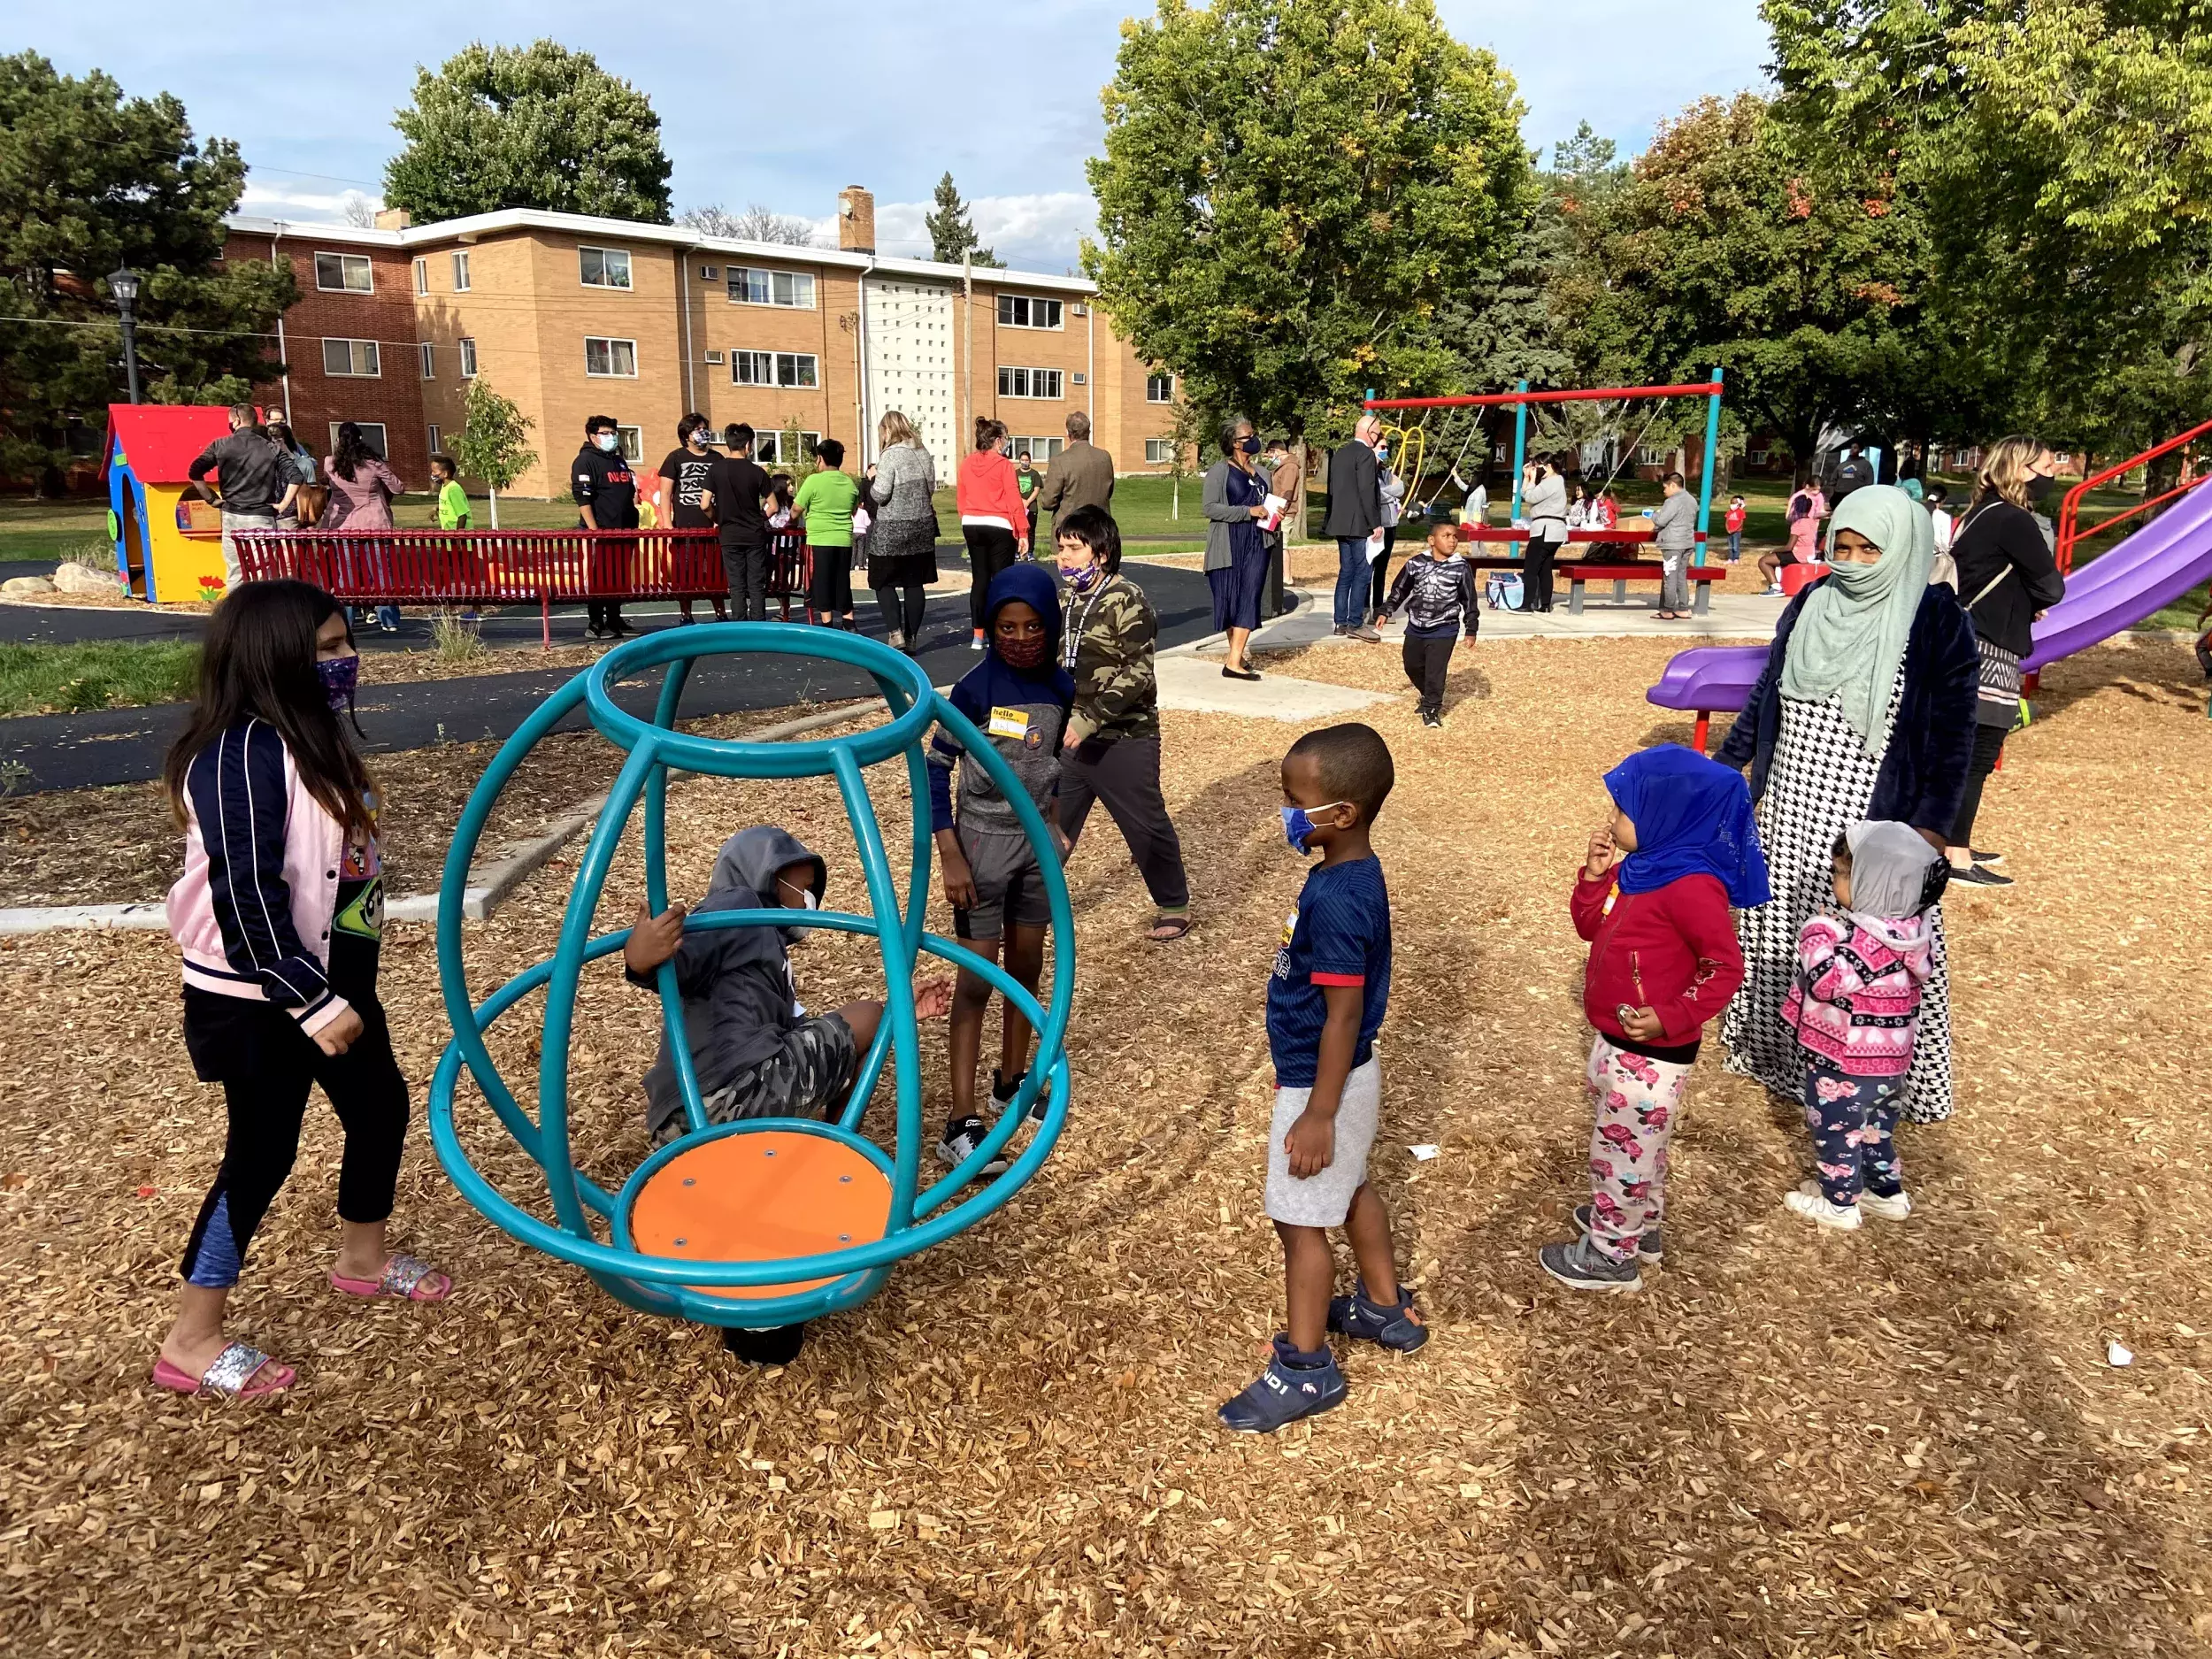 Several families recreate at a playground